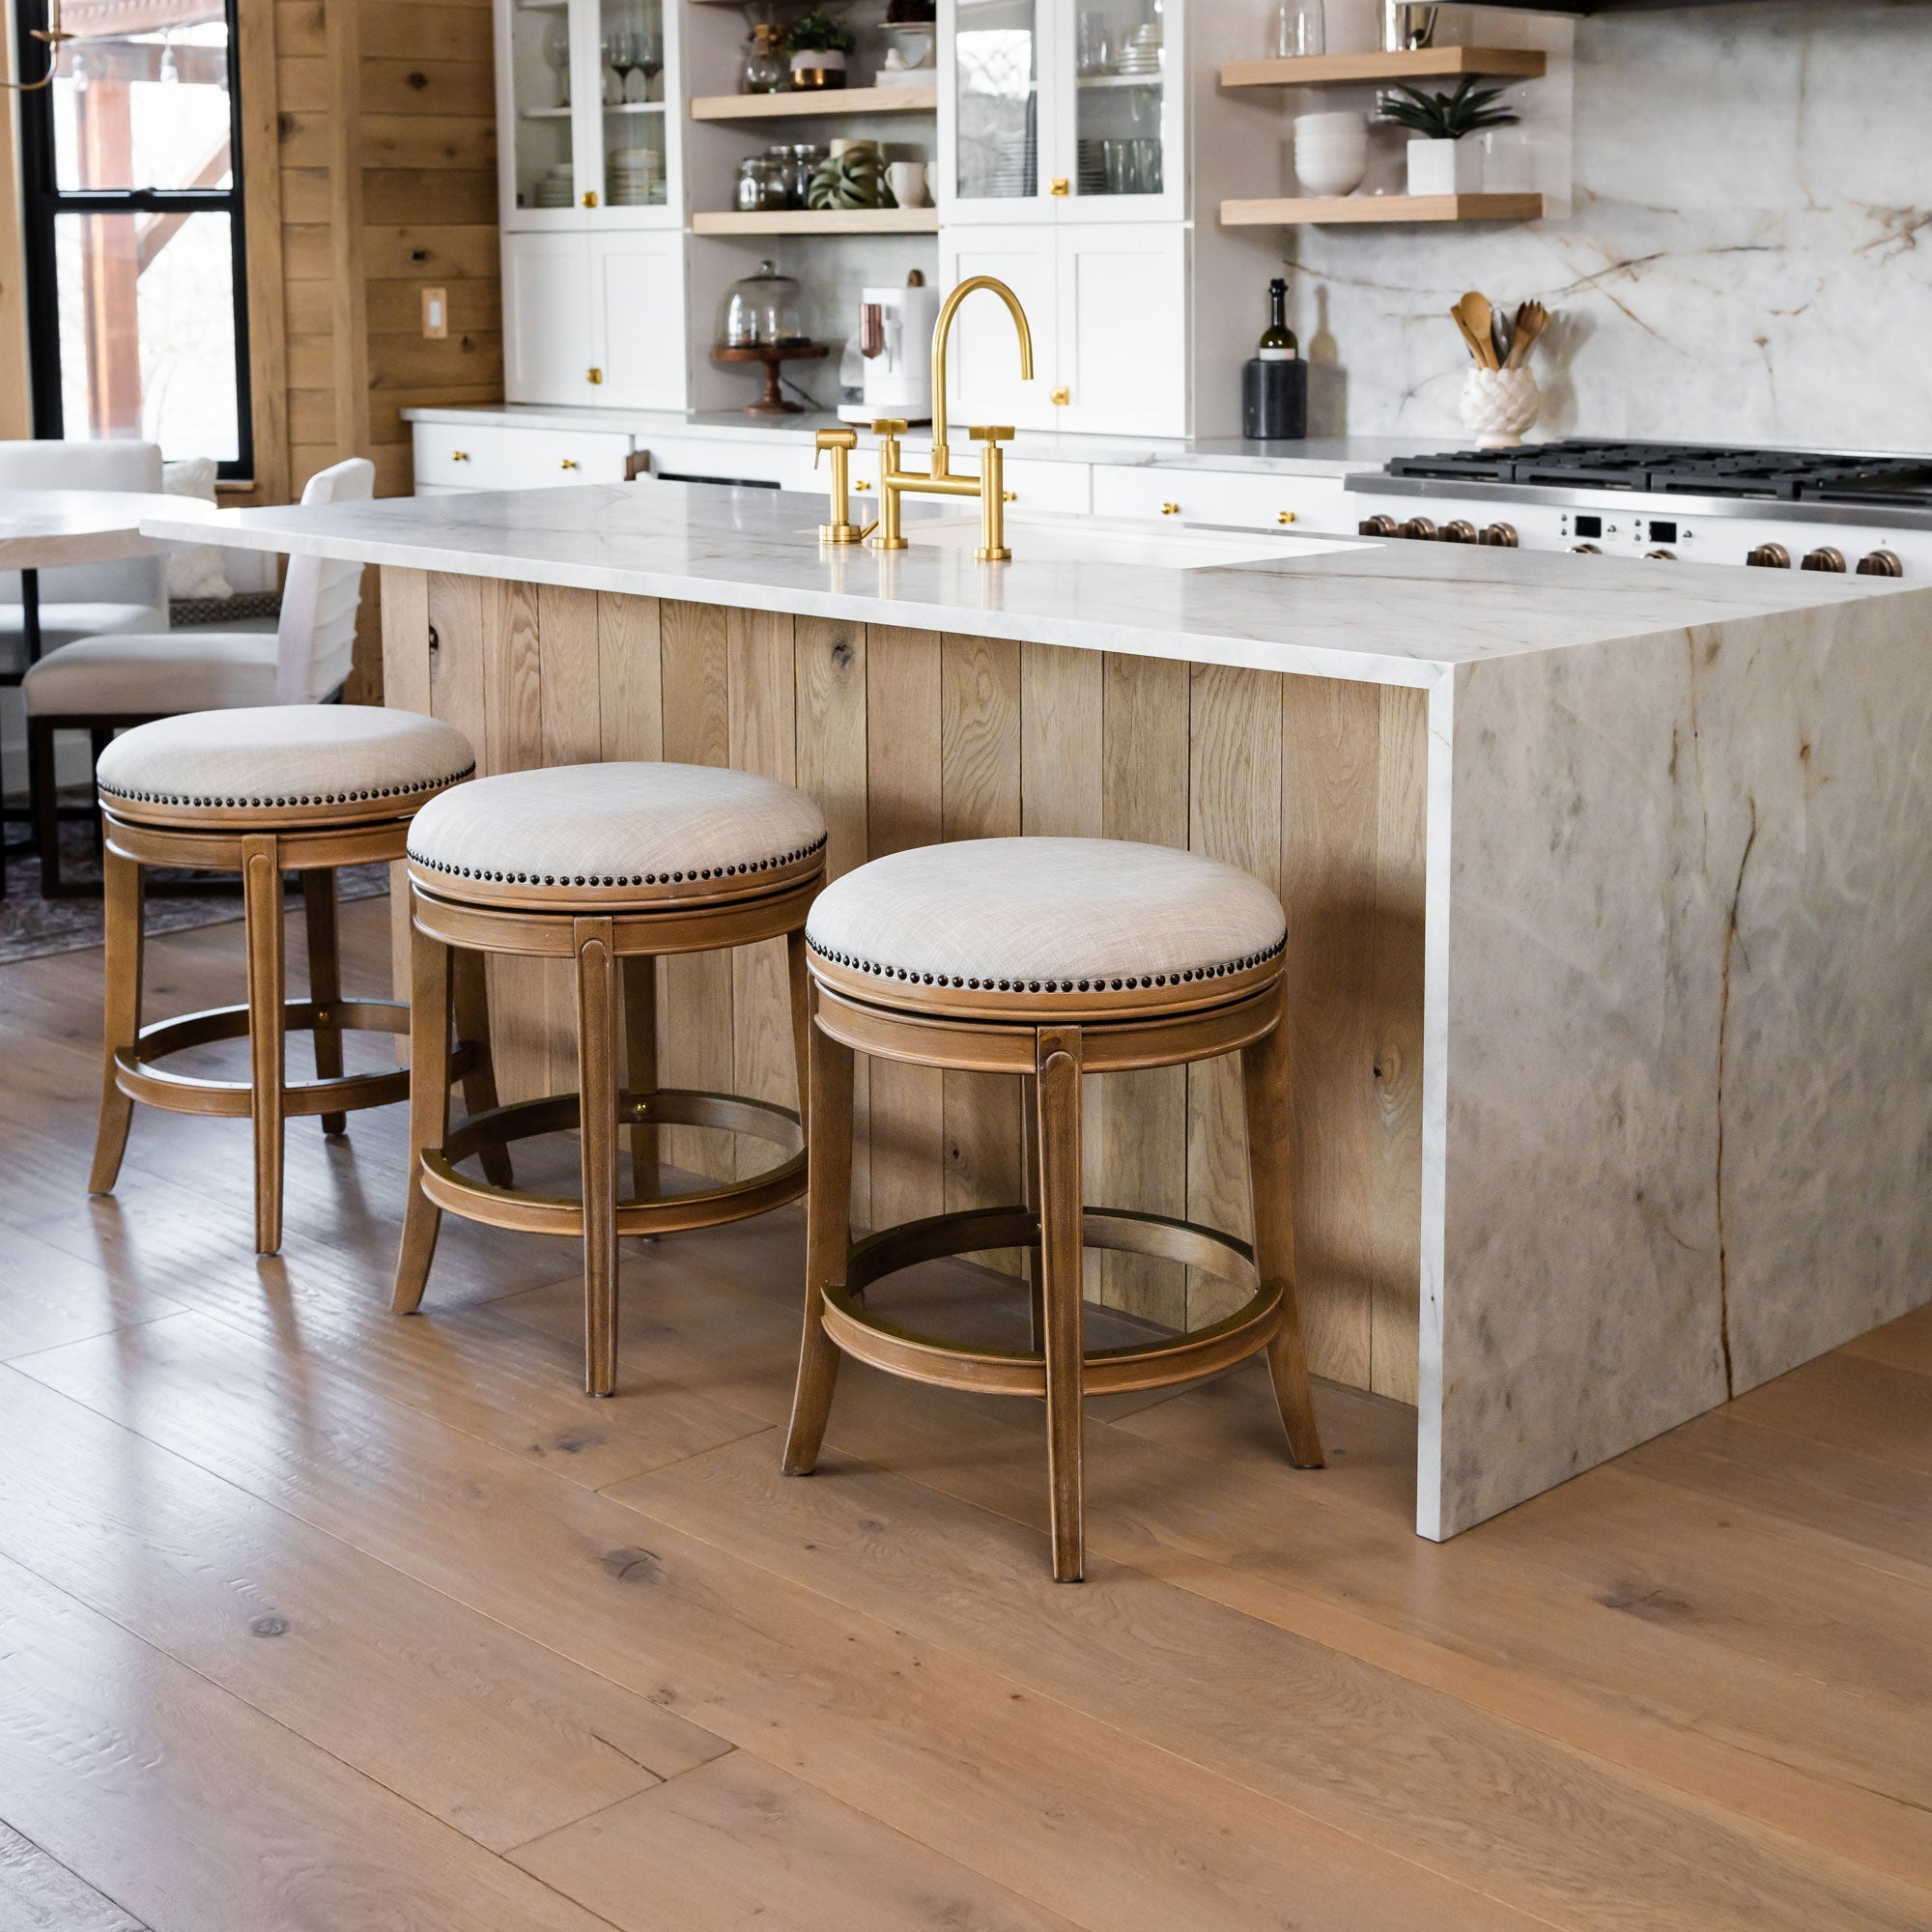 Alexander Backless Counter Stool in Weathered Oak Finish with Sand Color Fabric Upholstery in Stools by Maven Lane